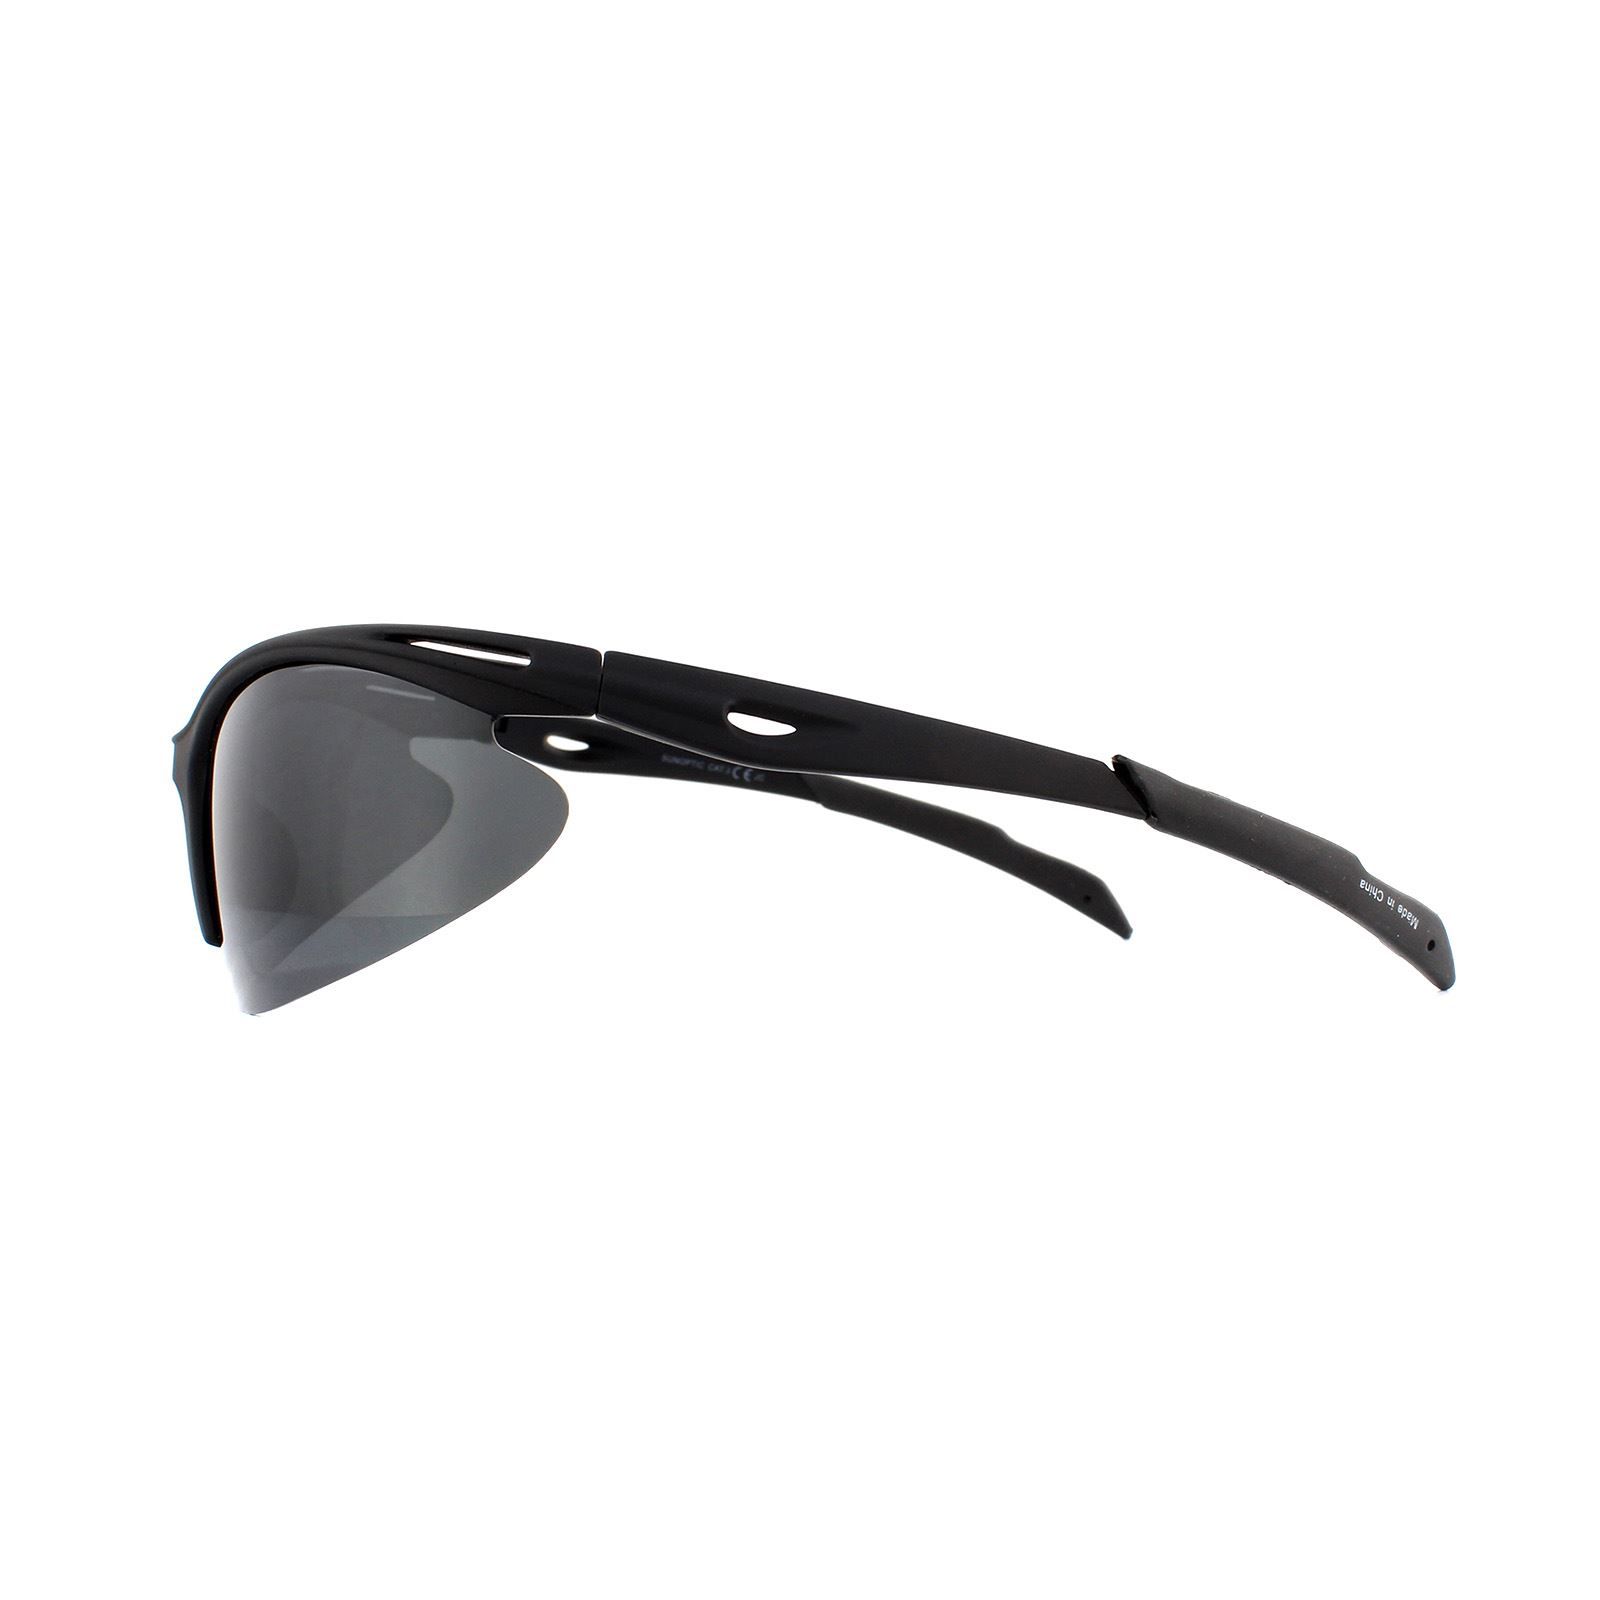 Montana Sunglasses SP301 Black Rubber Smoke Polarized are a lightweight semi-rimless style perfect for sports. Rubberised nose pads and temple tips ensure comfort and hold the sunglasses in place at all times. Polarized lenses guarantee comfort and eliminate glare to reduce eye strain.